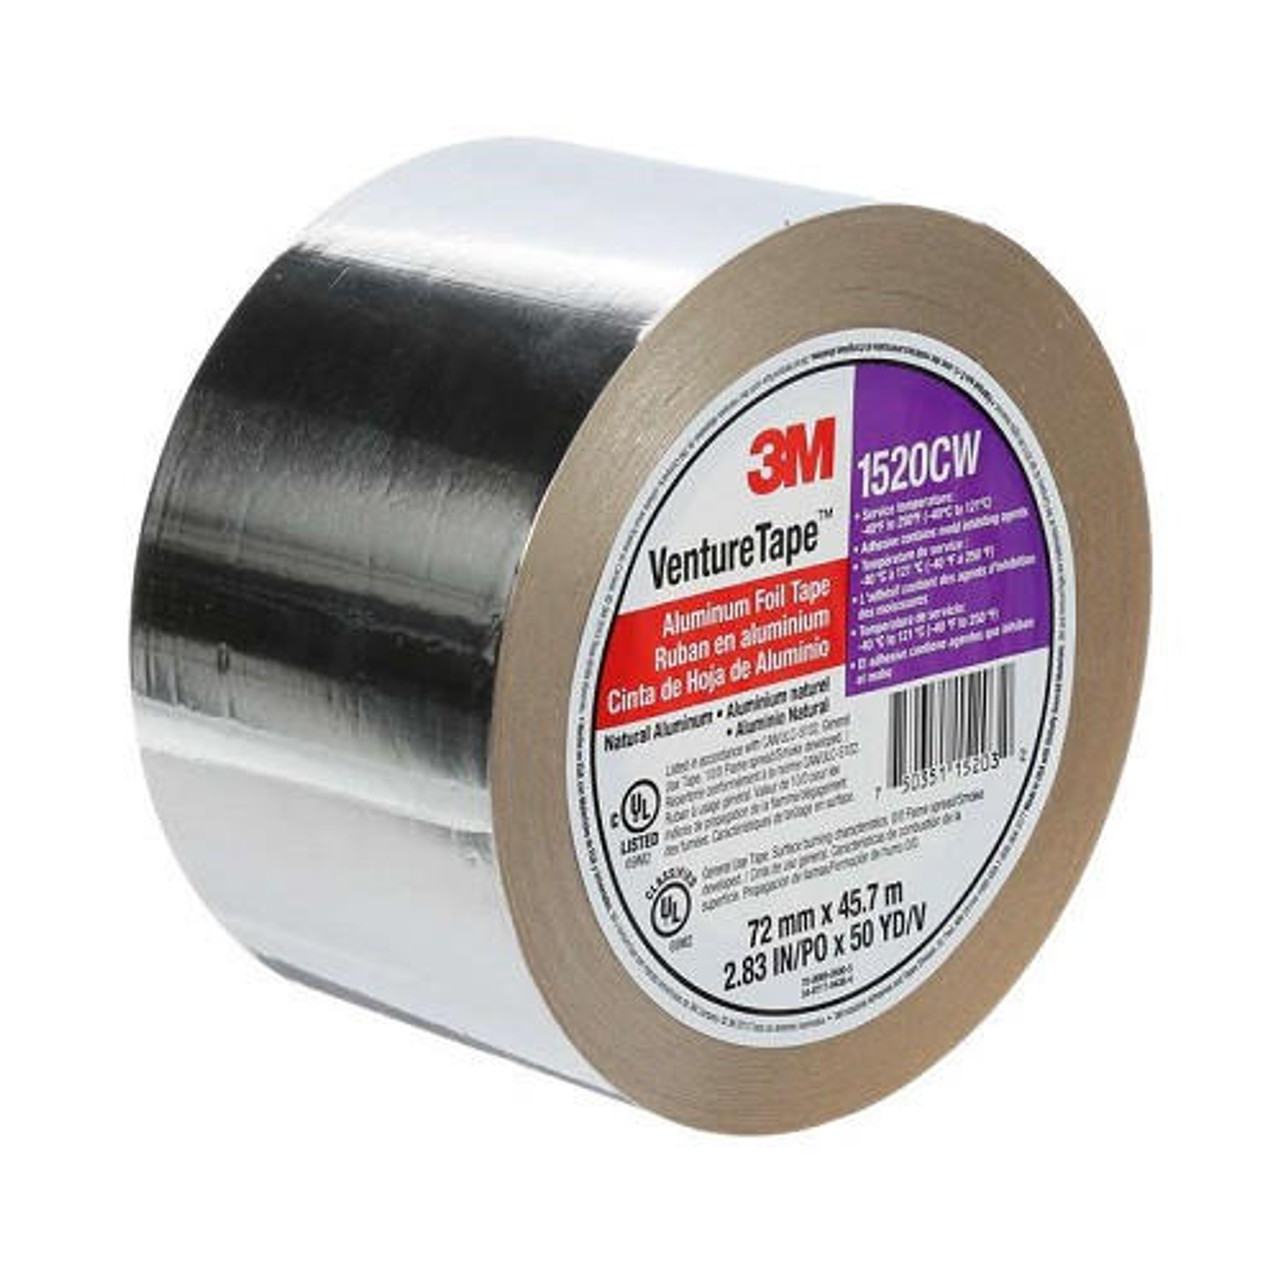 GTSE Wide Aluminum Foil Tape, 12 Rolls Bulk Contractors Pack, 4 inches x 55  Yards (164 ft), Multi-Purpose Silver Metal Tape, Strong Adhesive, Full